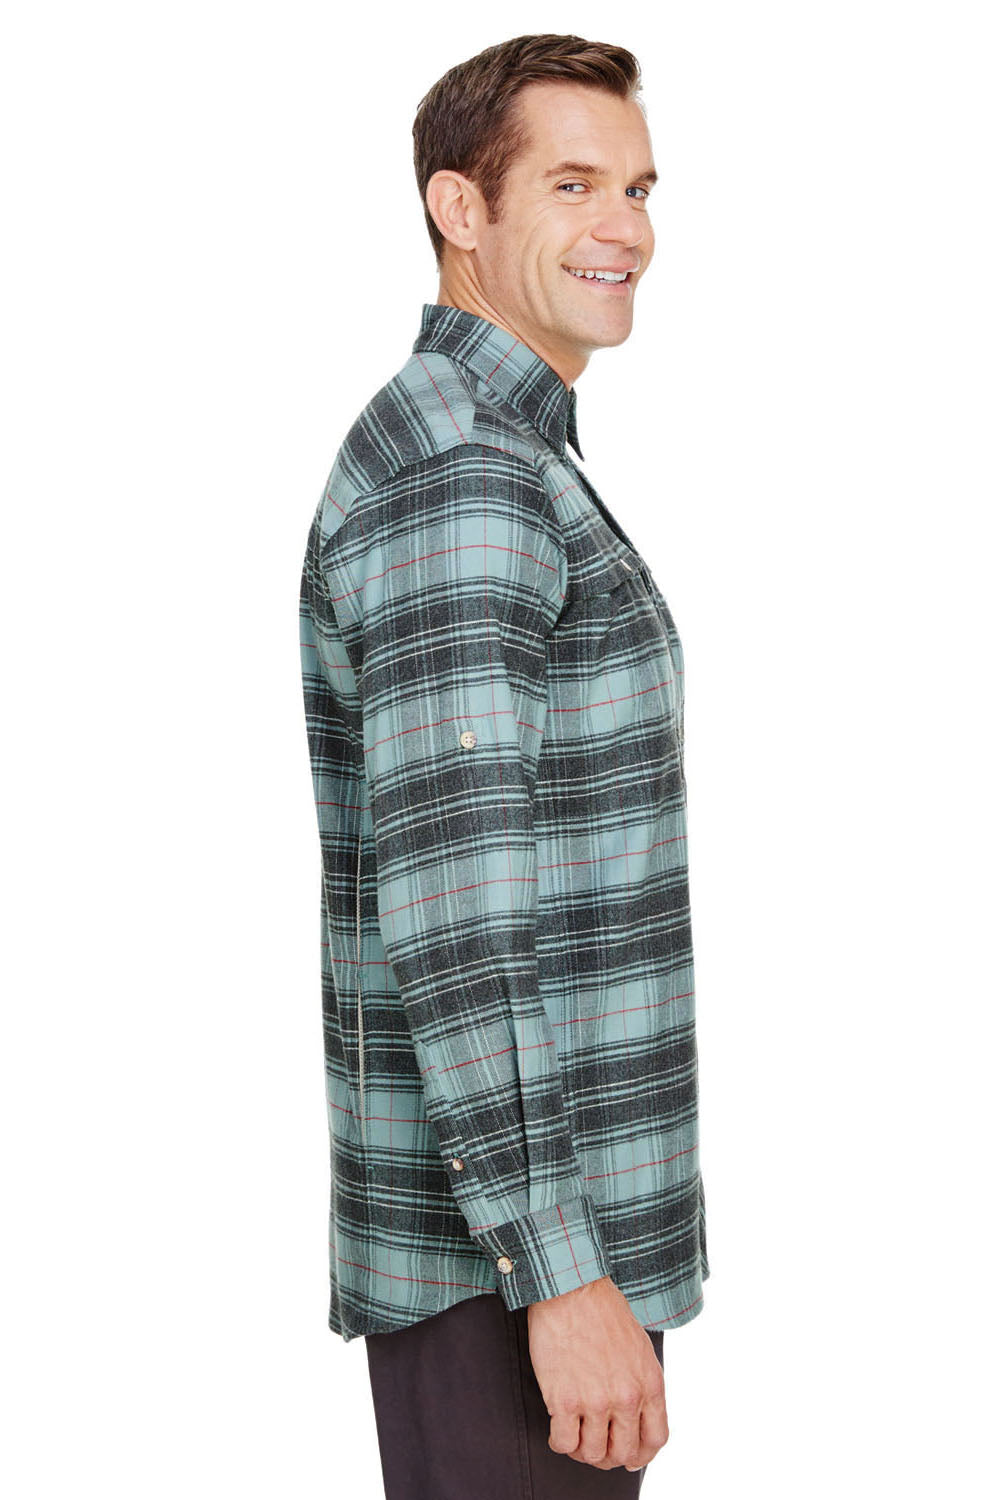 Backpacker BP7091 Mens Stretch Flannel Long Sleeve Button Down Shirt w/ Double Pockets Teal Blue Side